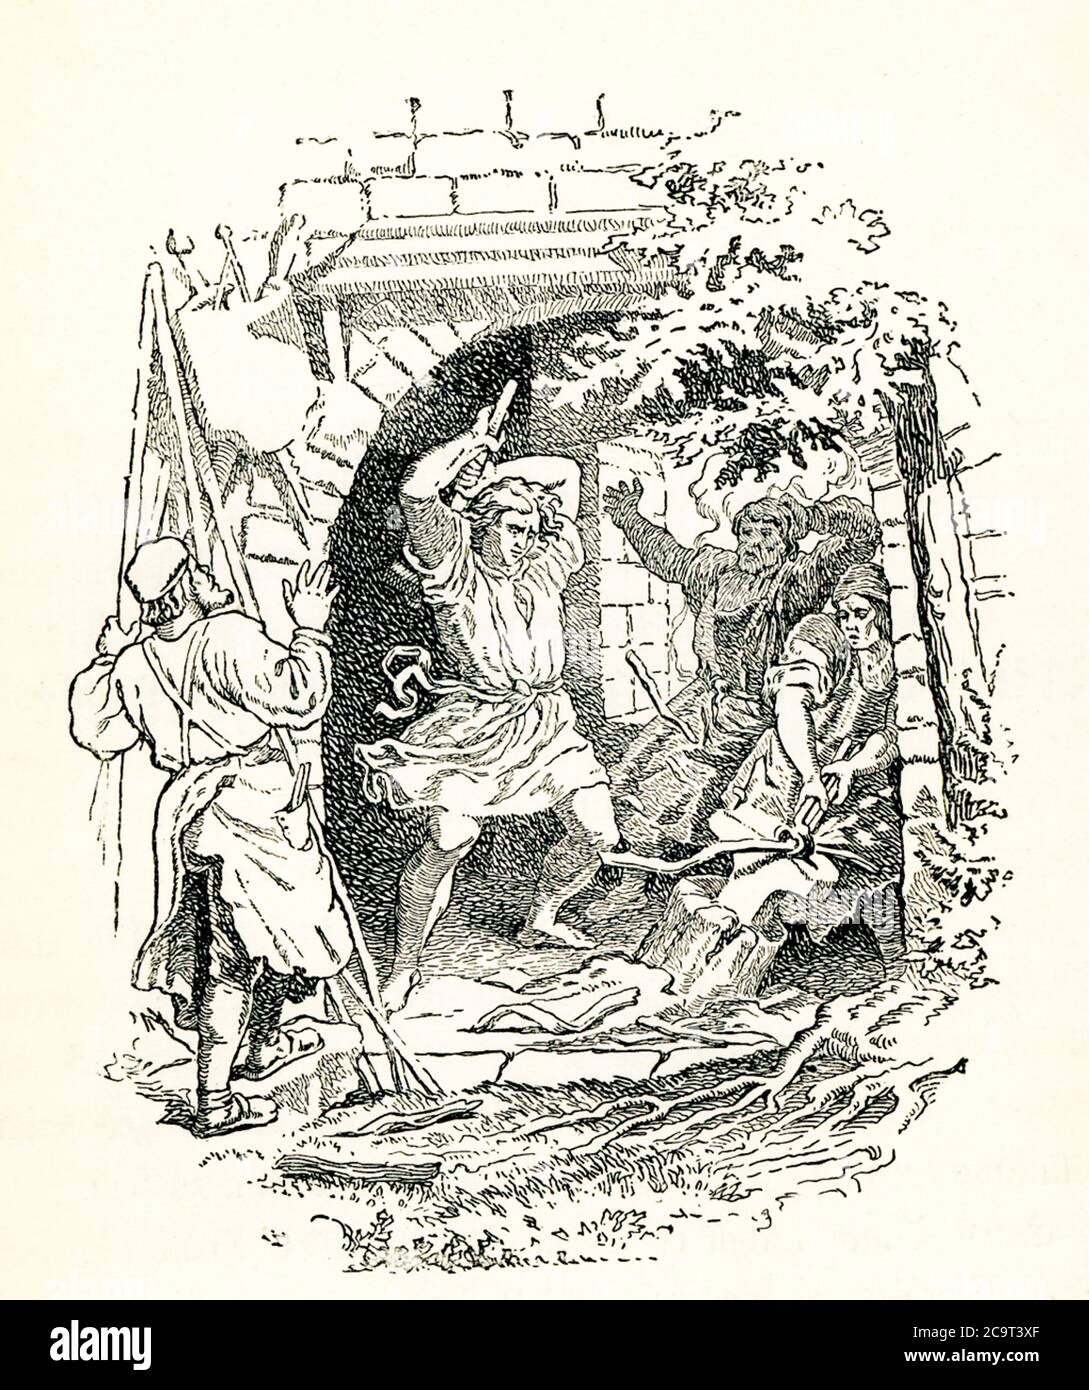 This illustration shows the Germanic hero Siegfried swinging the hammer with his powerful strength. Prince Siegfried (also known as Sigurd), the famed hero of Germanic mythology, was the son of King Siegmund of the Netherlands. His wife was Kriemhild, the heroine of the Nibelungenlied. In Germanic legends she is also called Gudrun, and in Wagner's Der Ring des Nibelungen she is known as Gutrune. In Norse mythology she was the sister of Gunnar. Revenge, intrigue, sibling rivalry all play a role in Gunnar's killing of Siegfried. Stock Photo